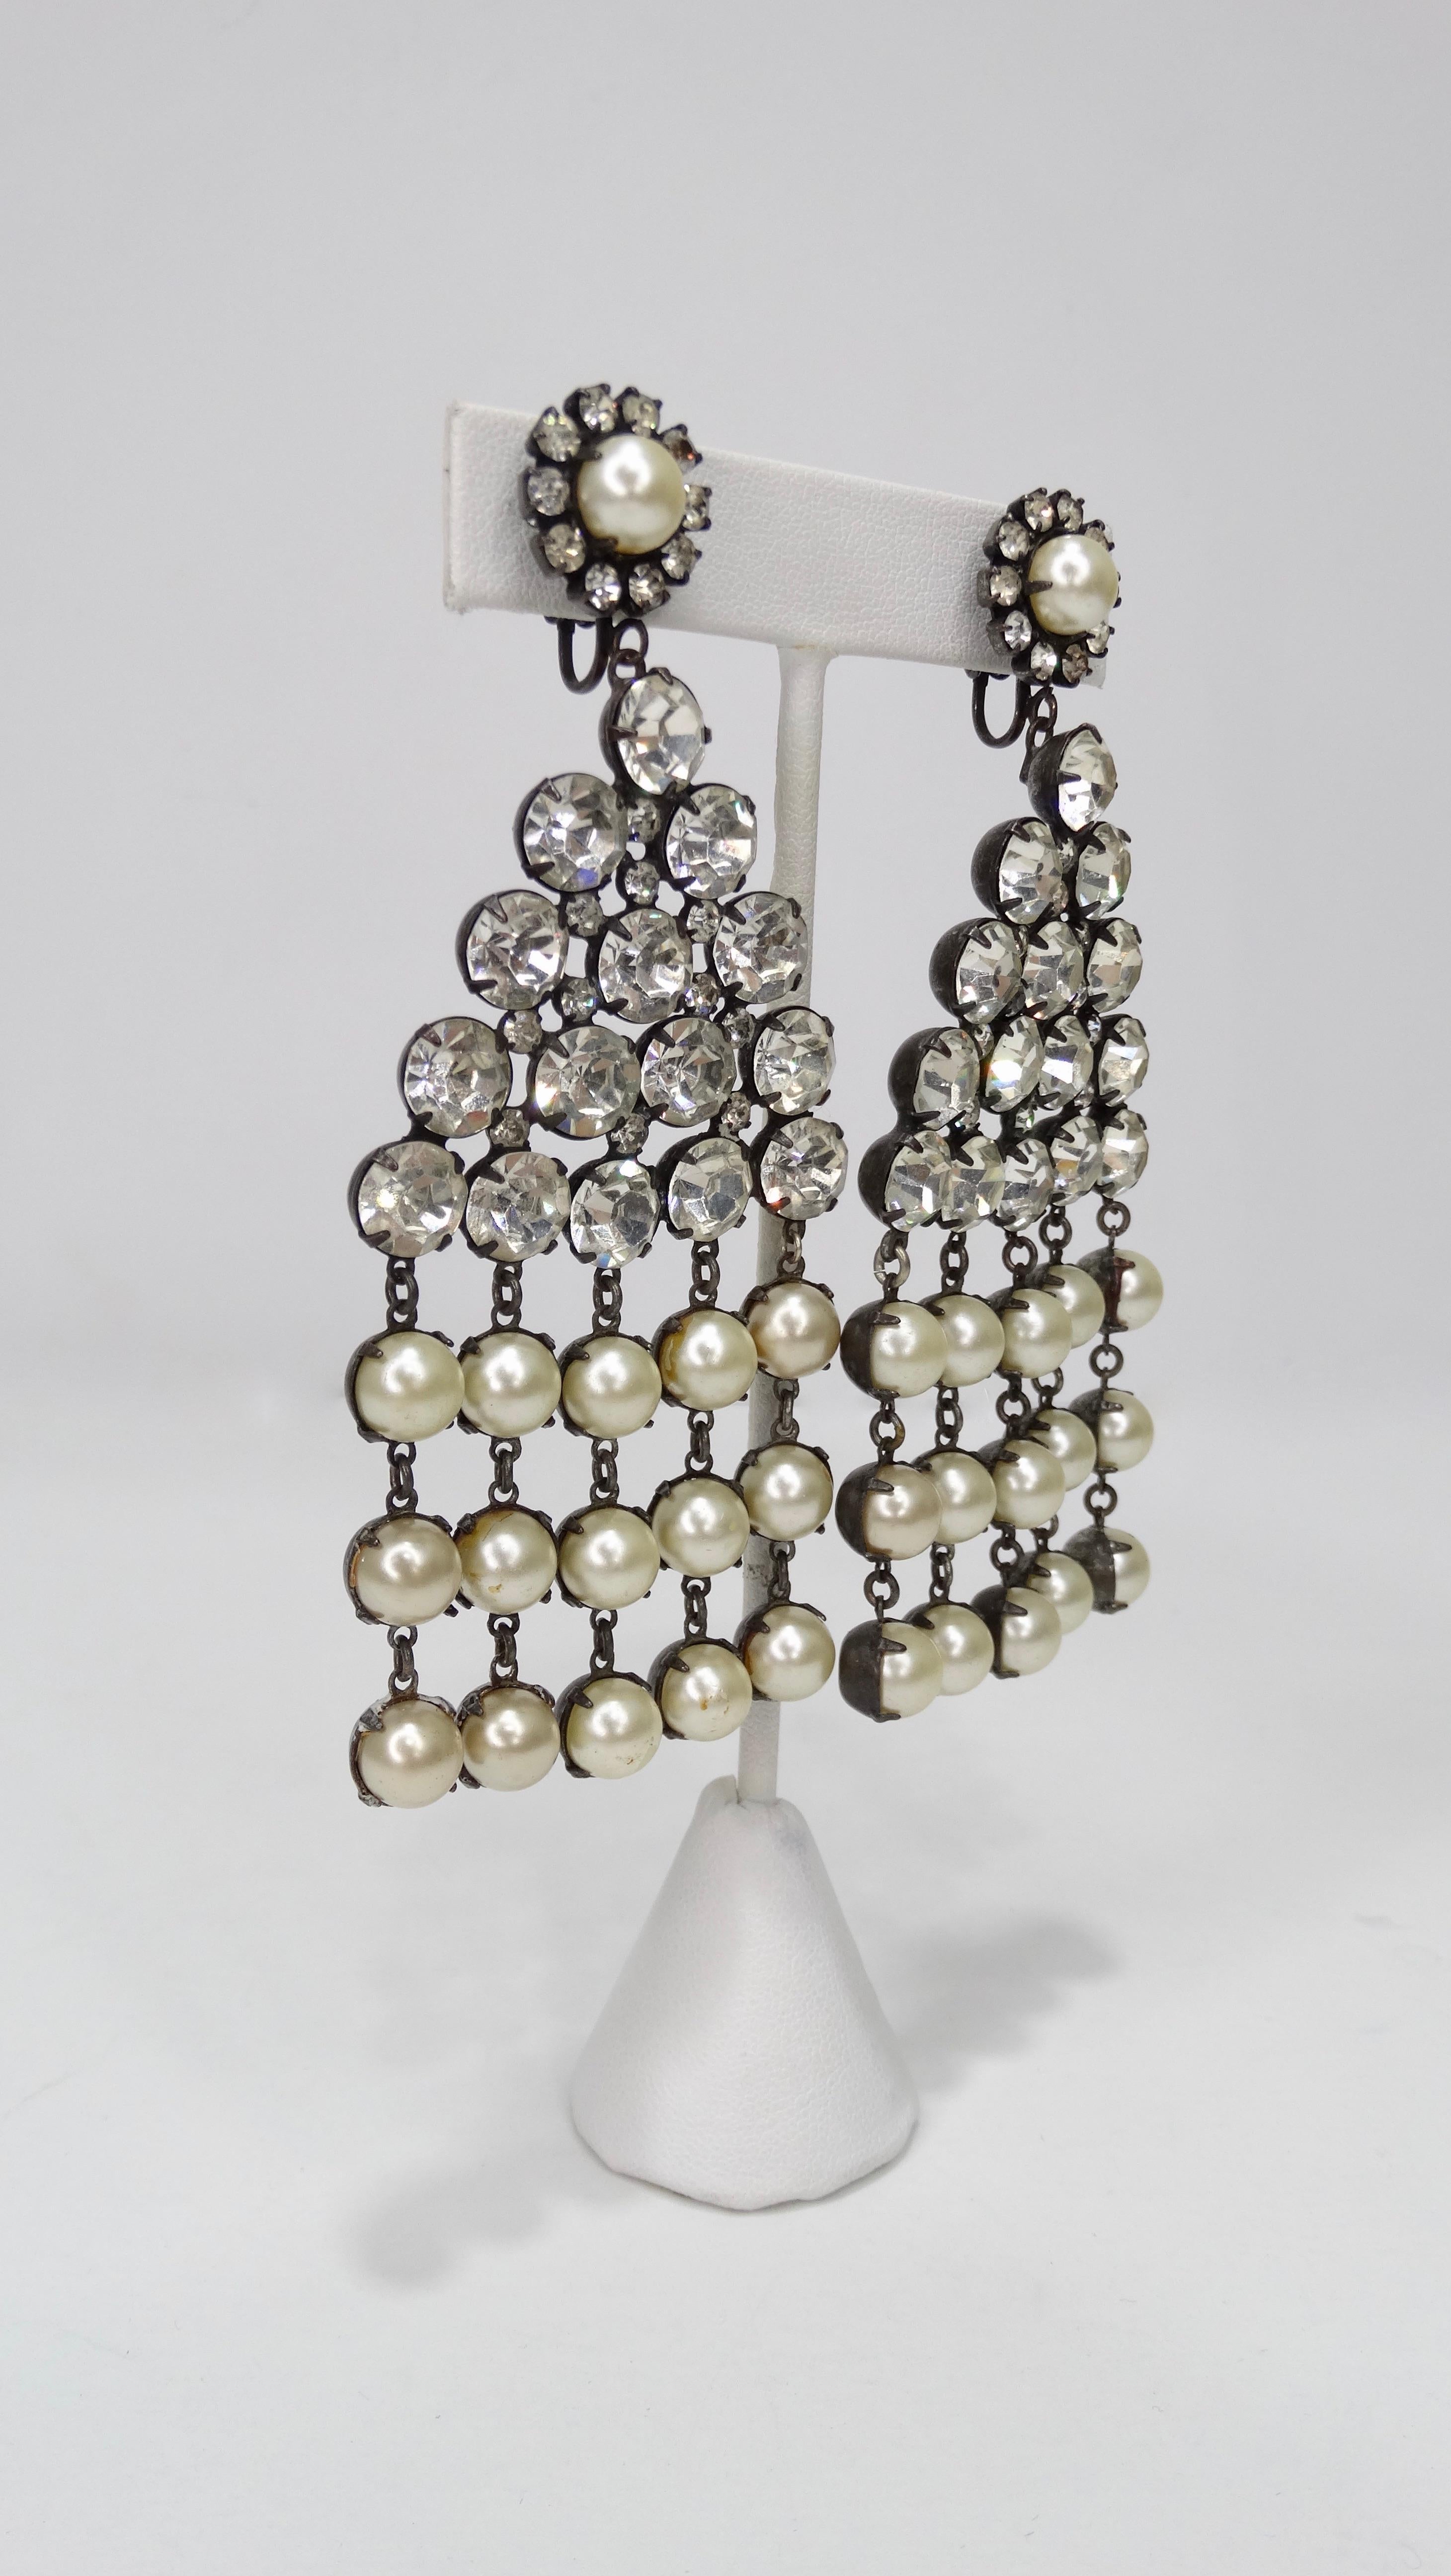 Add some sparkle to your look with these Kenneth Jay Lane earrings! Circa 1960s, these gun metal dangle earrings feature a center rhinestone triangle with free hanging rows of faux pearls. Clip-on back closures stamped KJL. A true pair of vintage